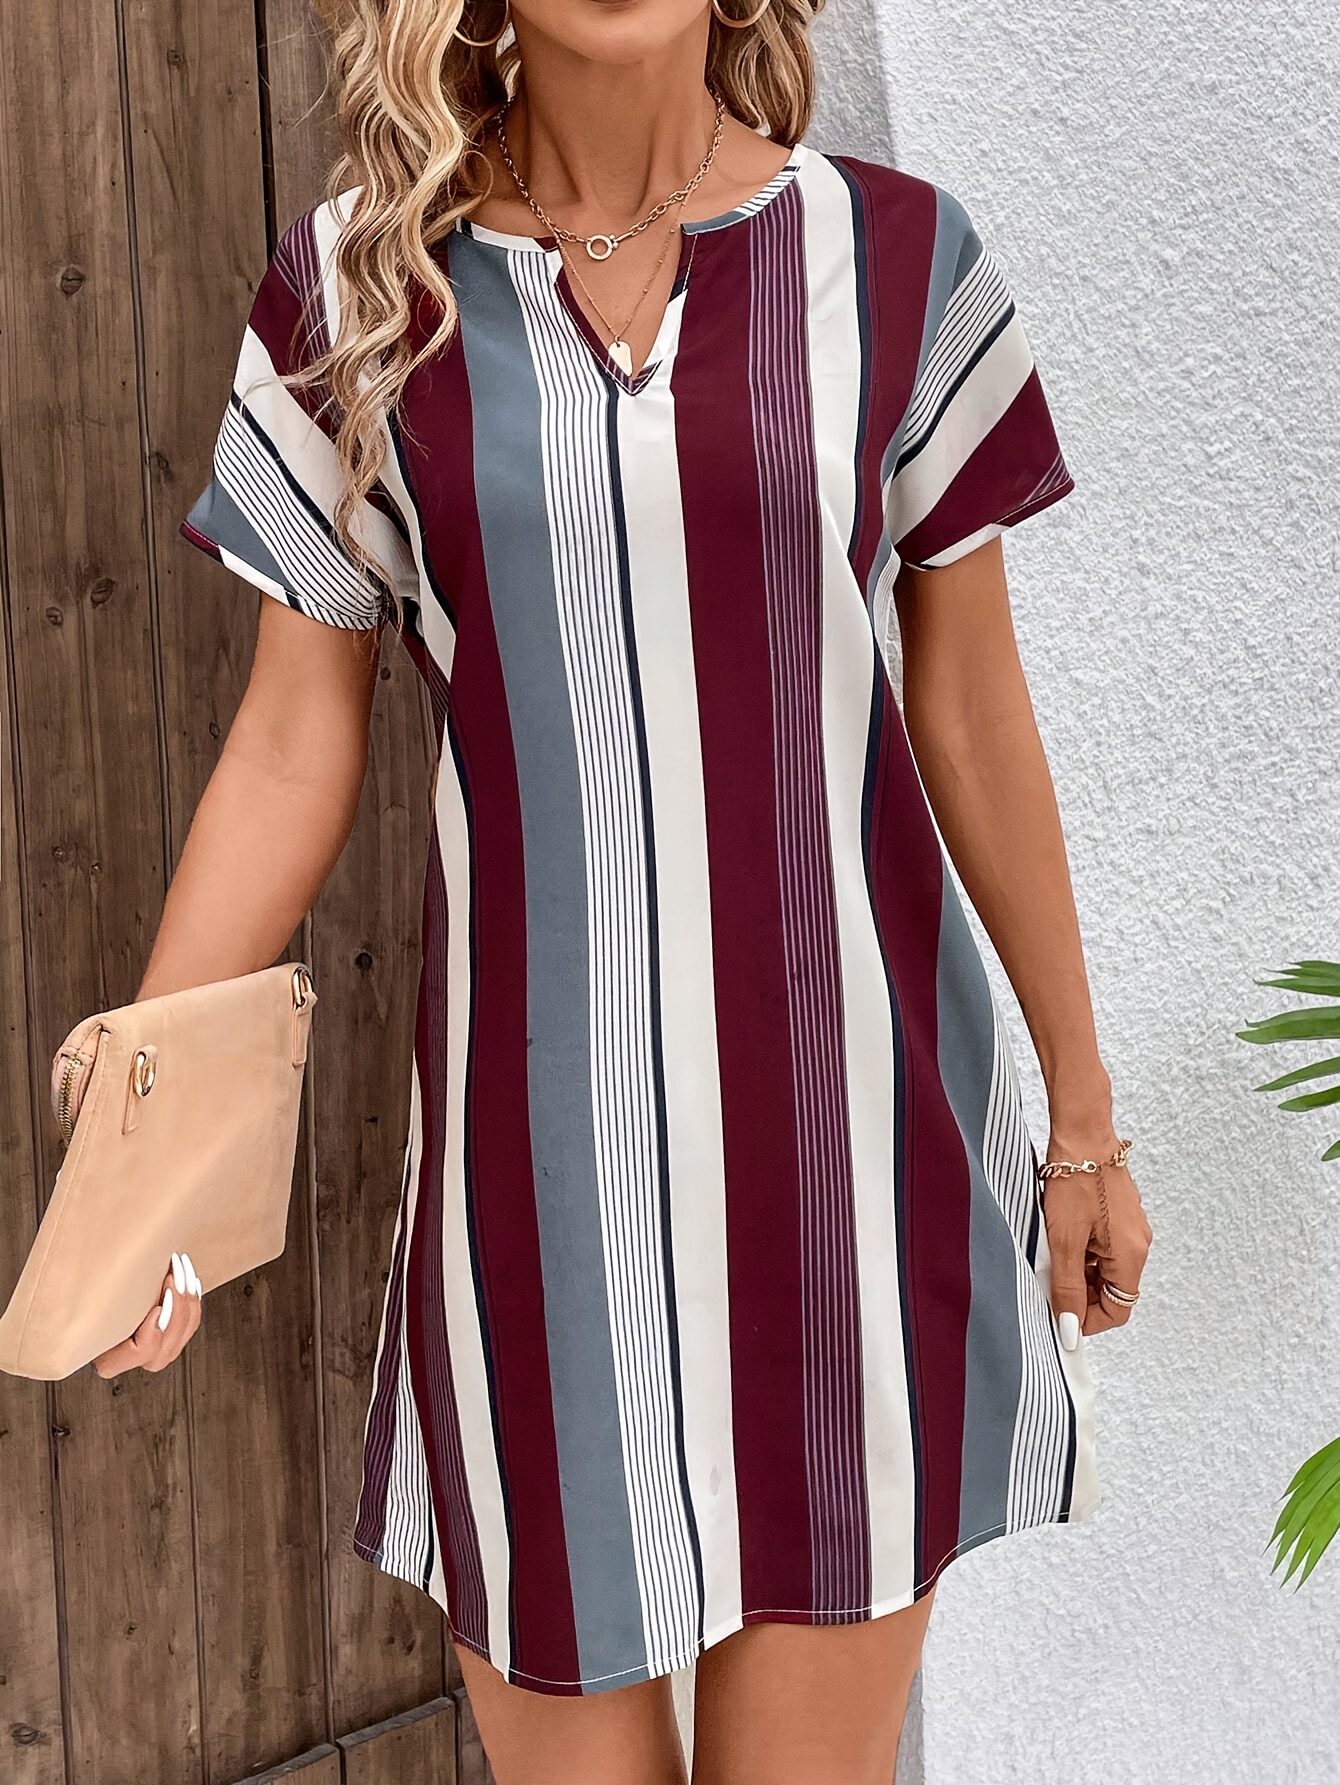 striped print notched neck dress casual short sleeve dress for spring summer womens clothing details 2